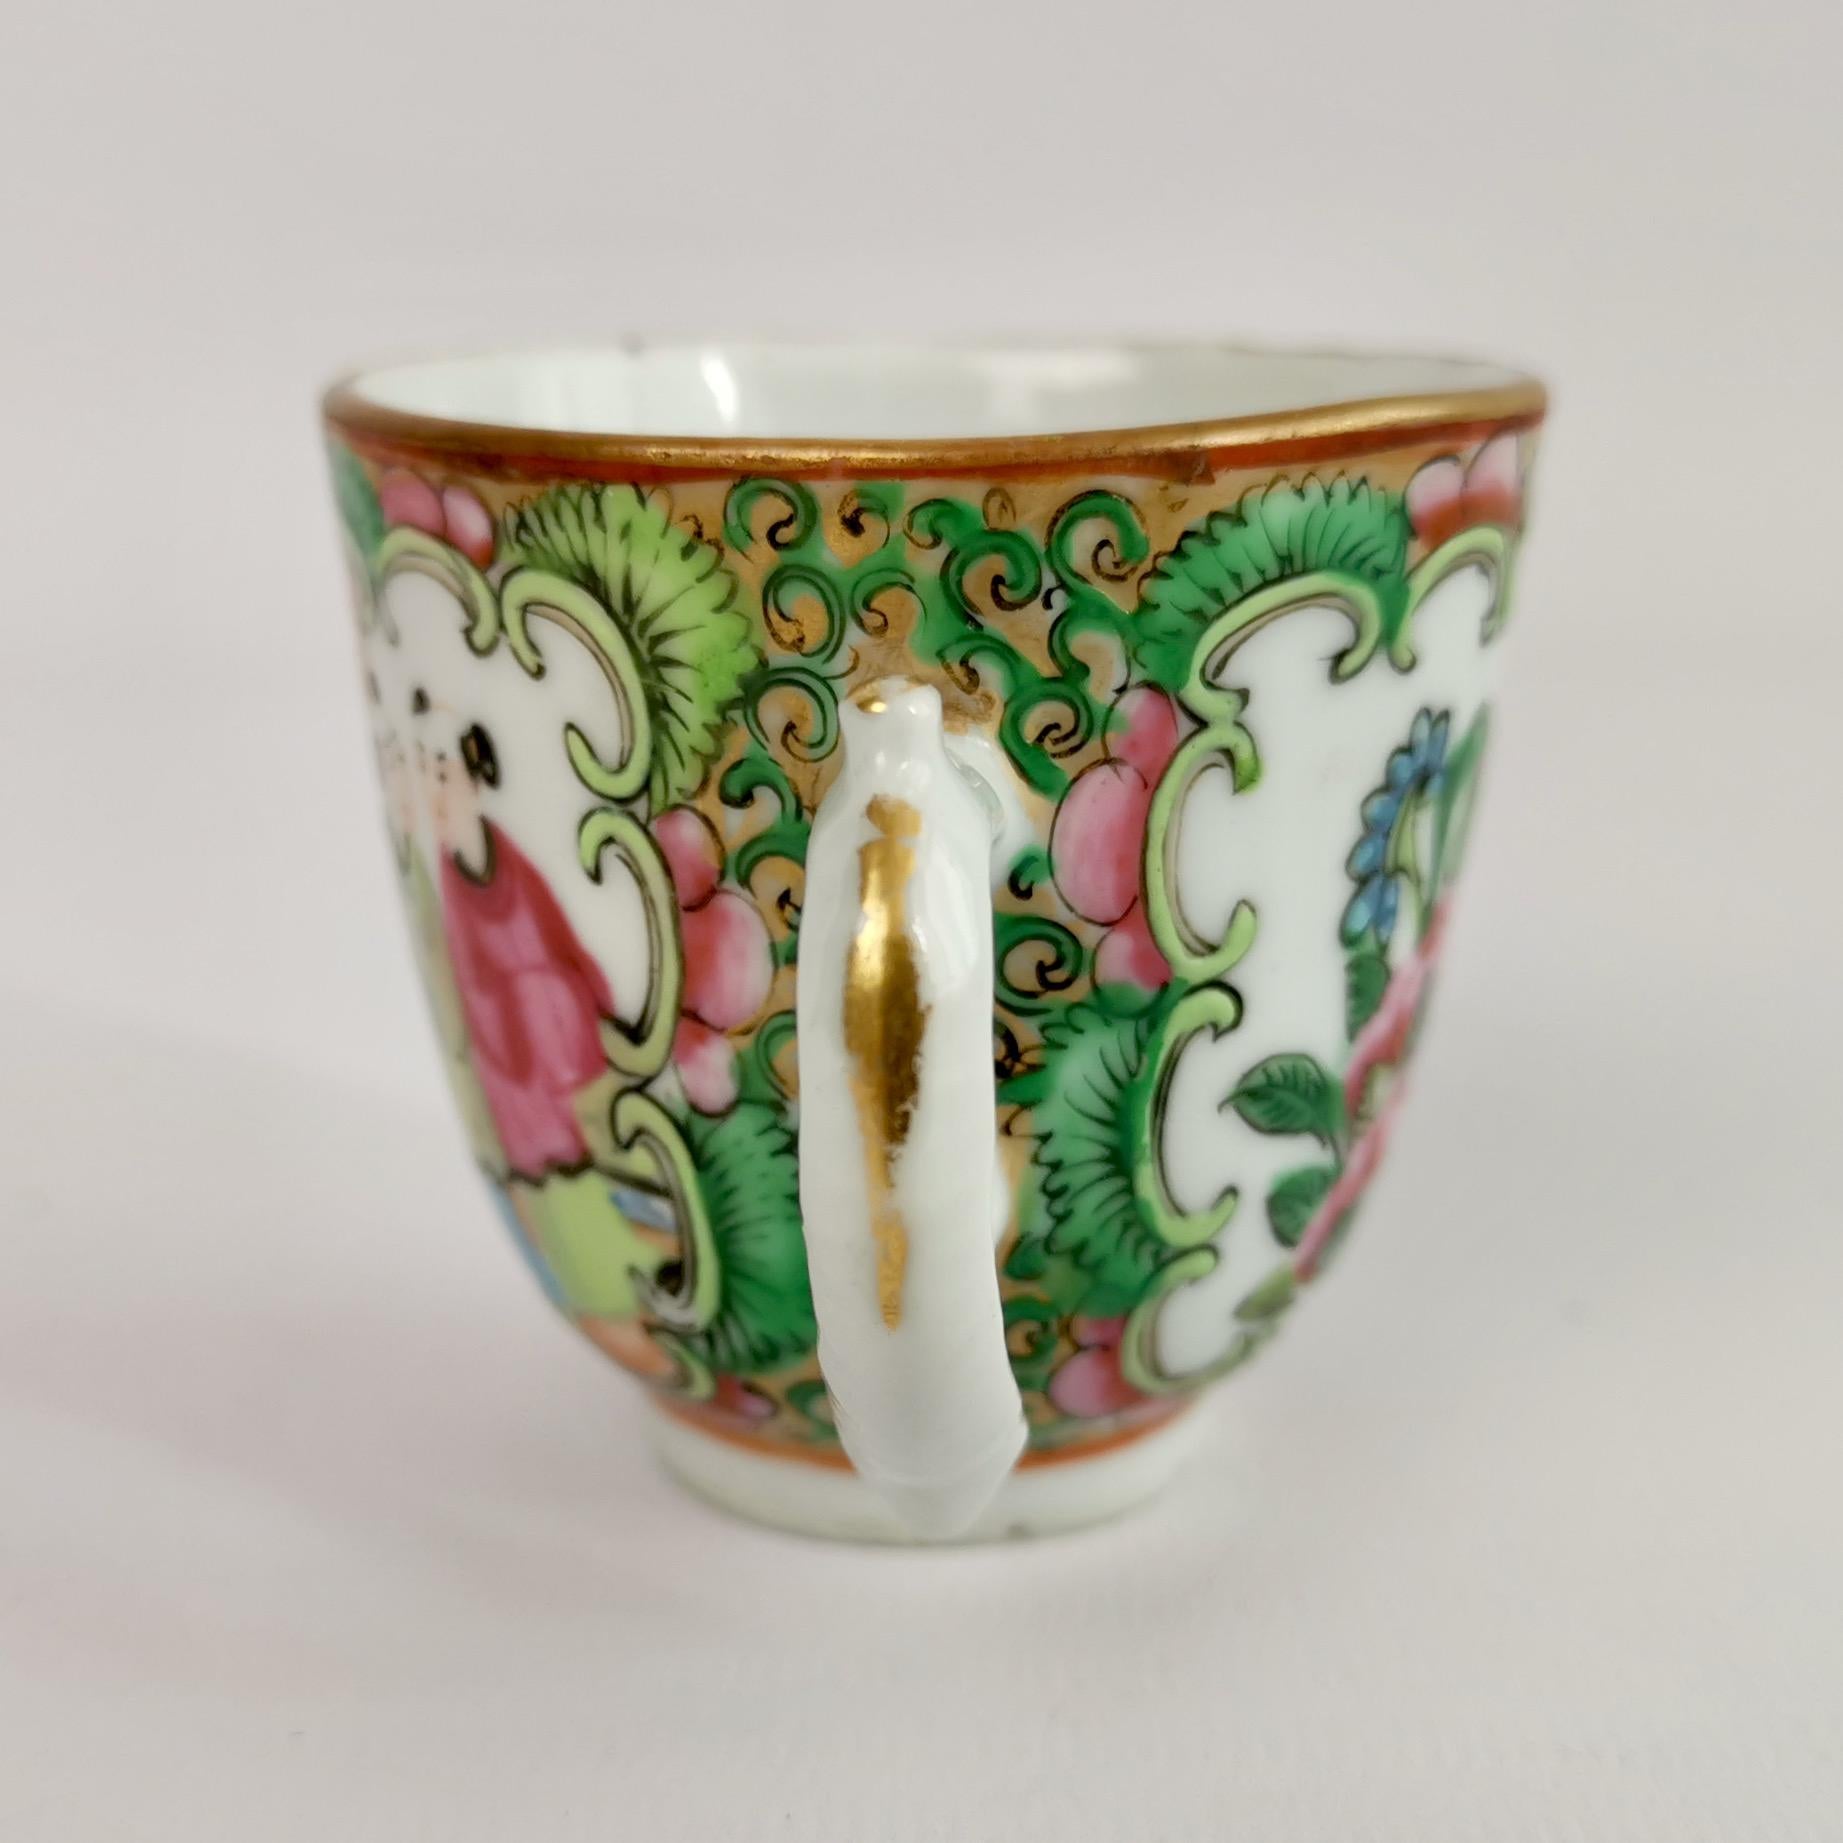 18th Century Chinese Export Porcelain Coffee Cup, Famille Verte, Qianlong, 1760-1780